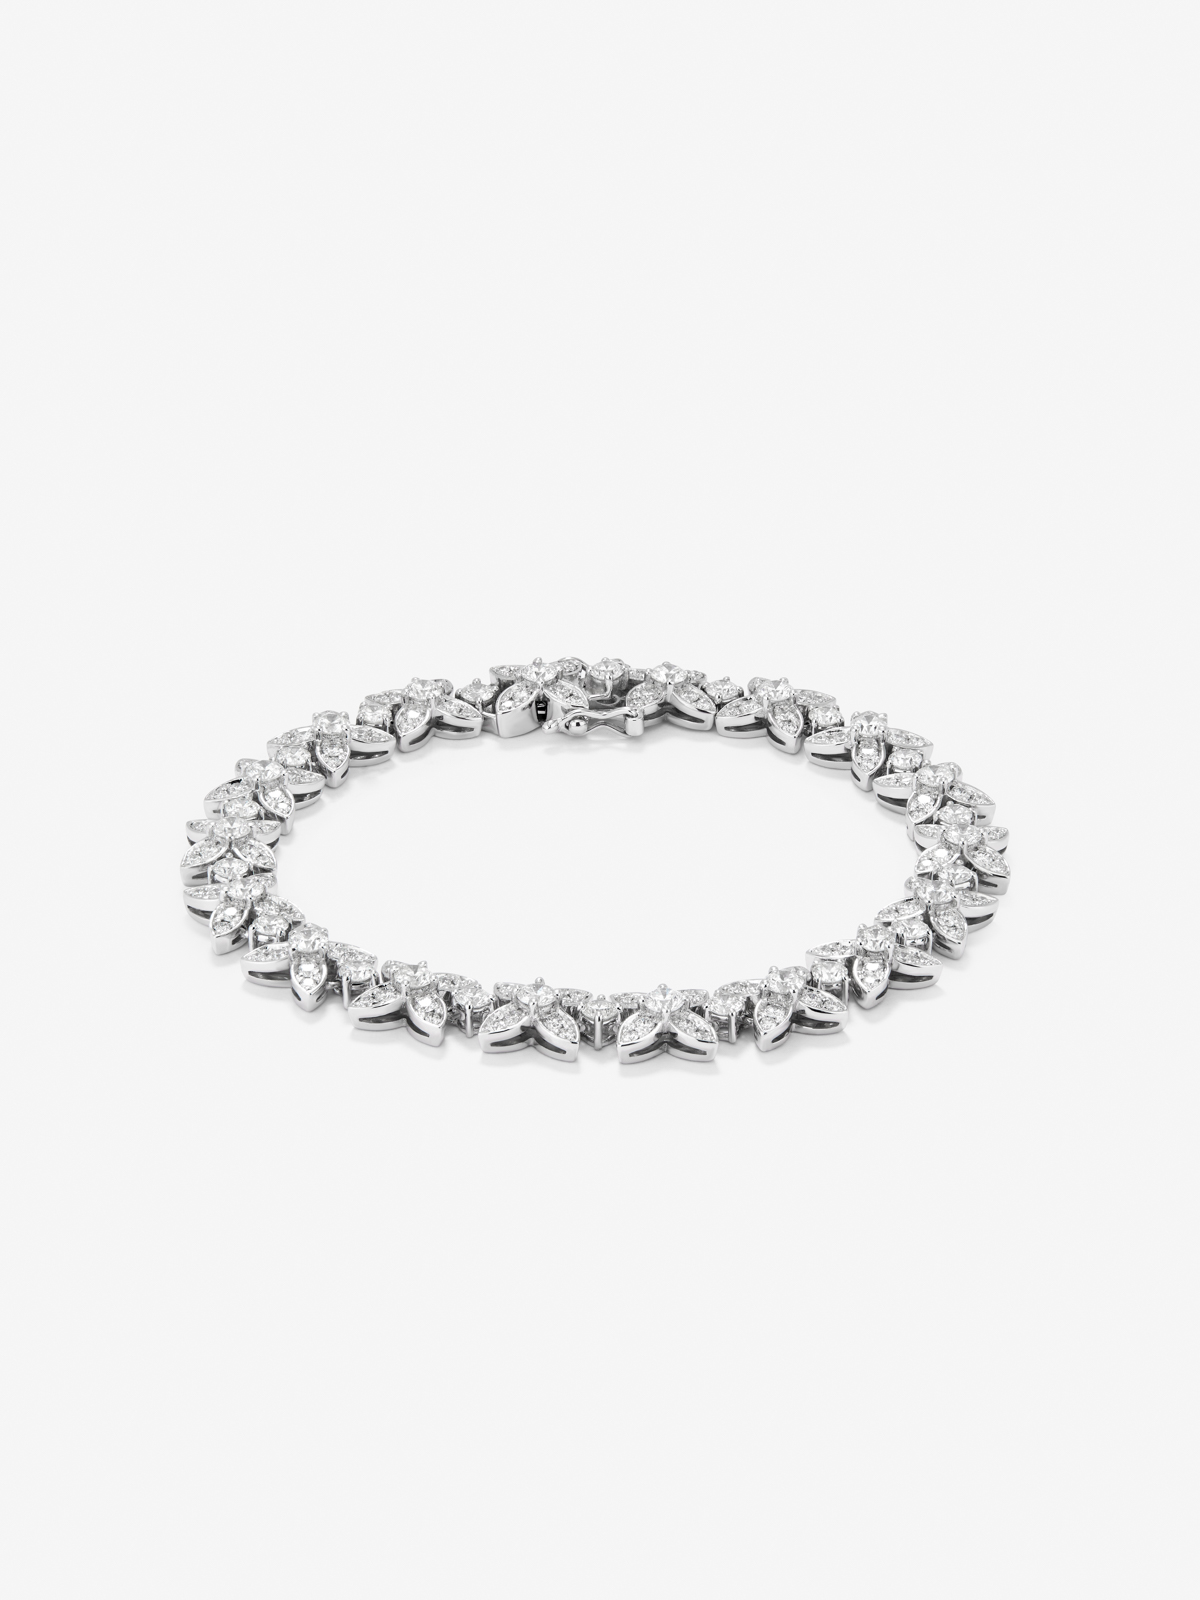 18K white gold bracelet with white diamonds in 5.41 cts